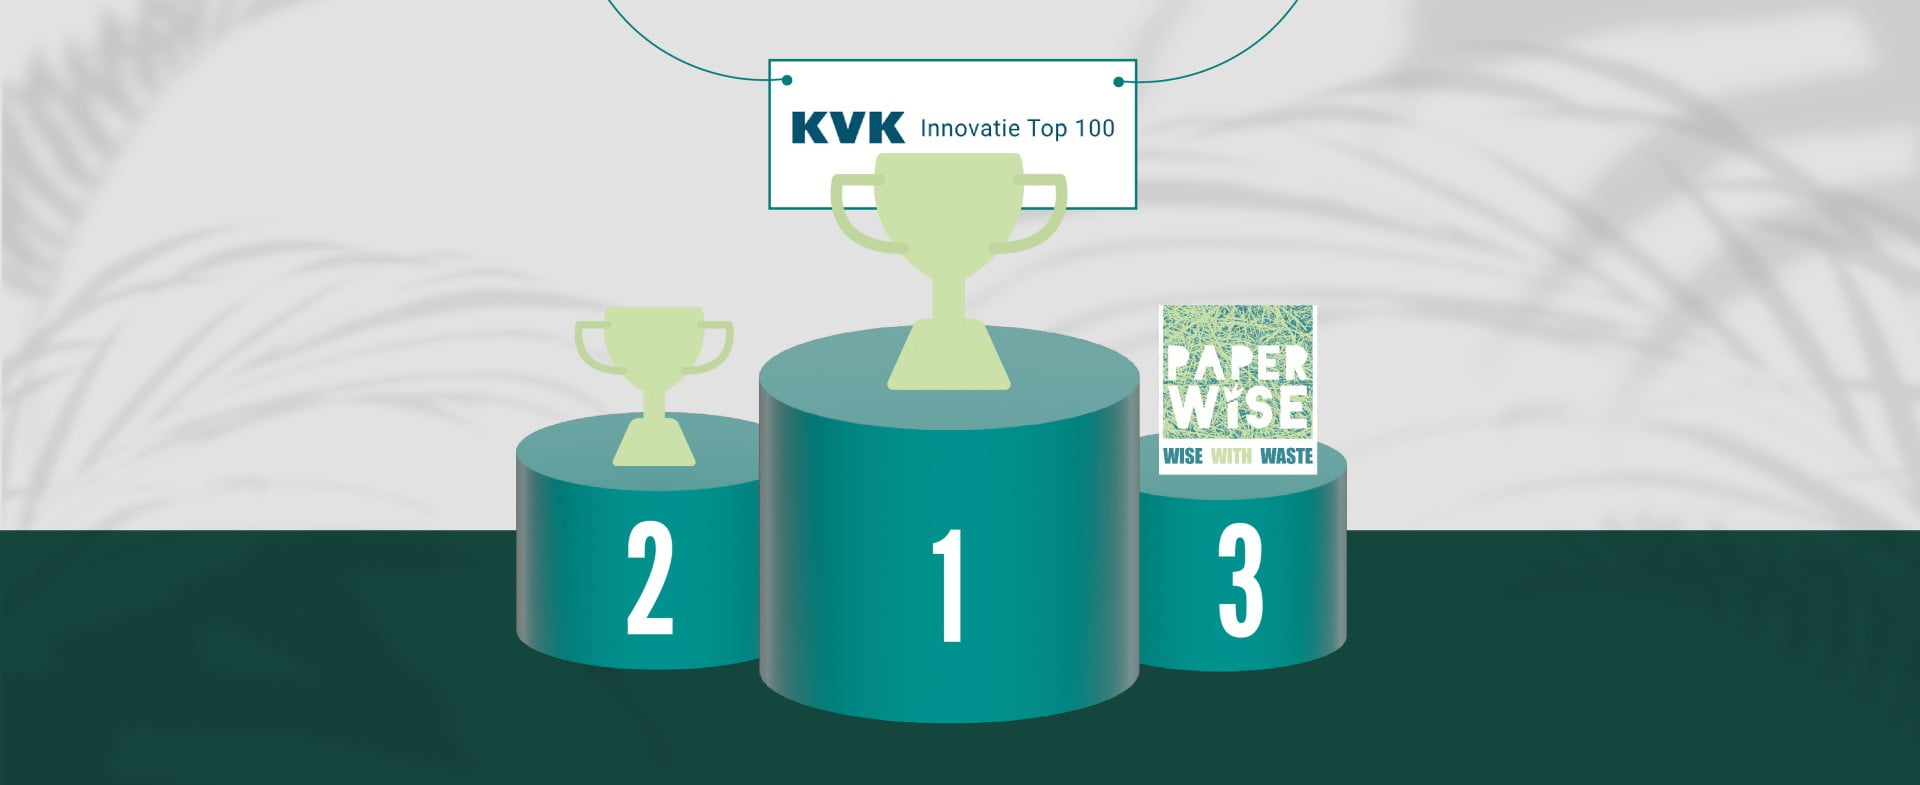 PaperWise takes third spot in Chamber of Commerce Innovation Top 100